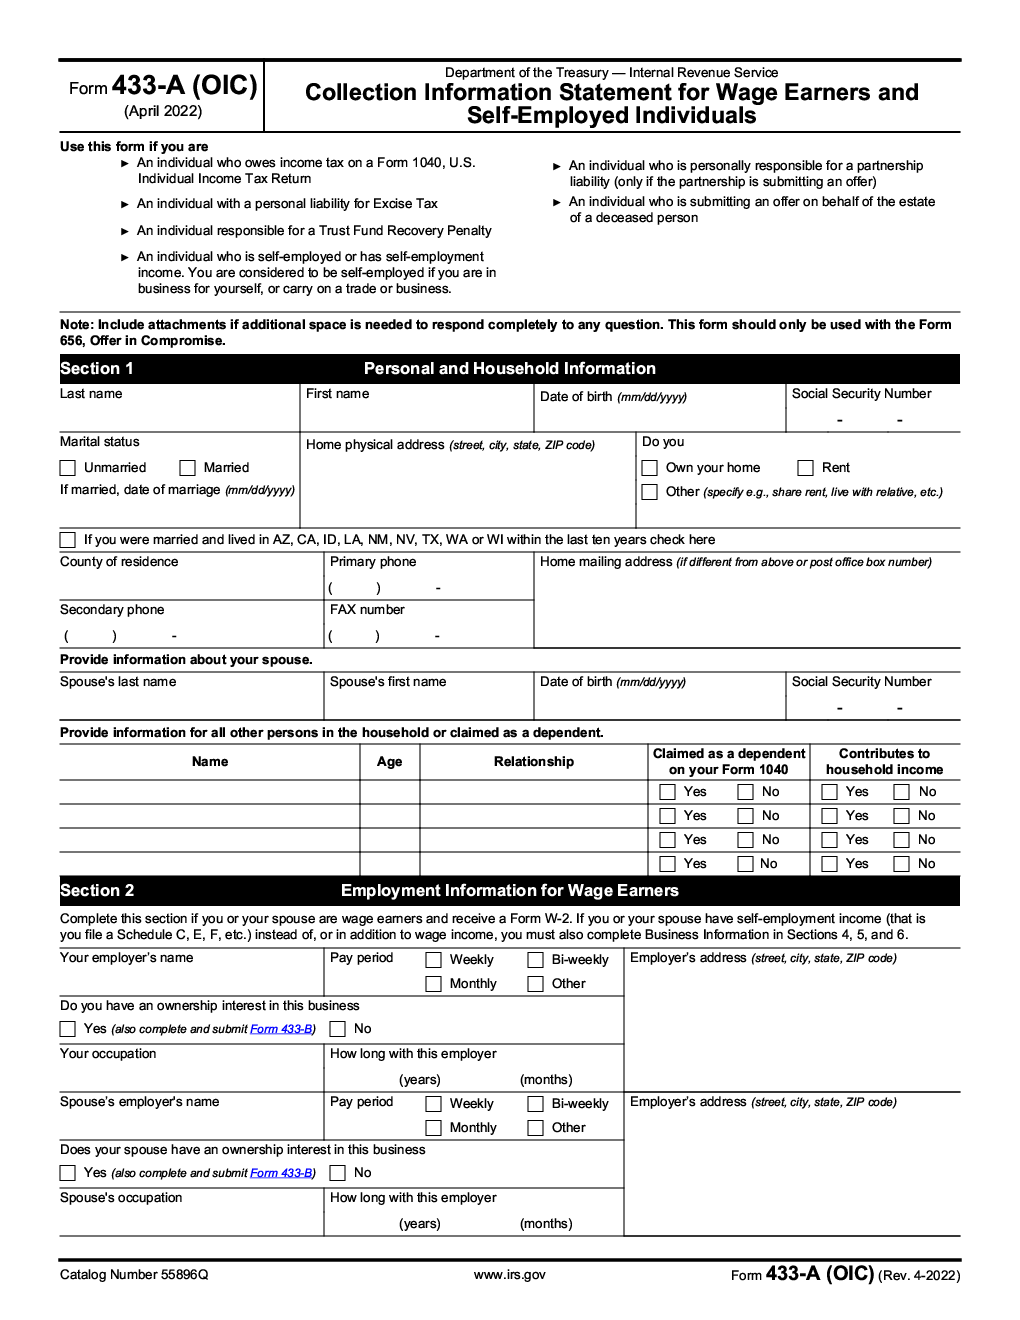 irs-form-433-a-collection-information-statement-for-wage-earners-and